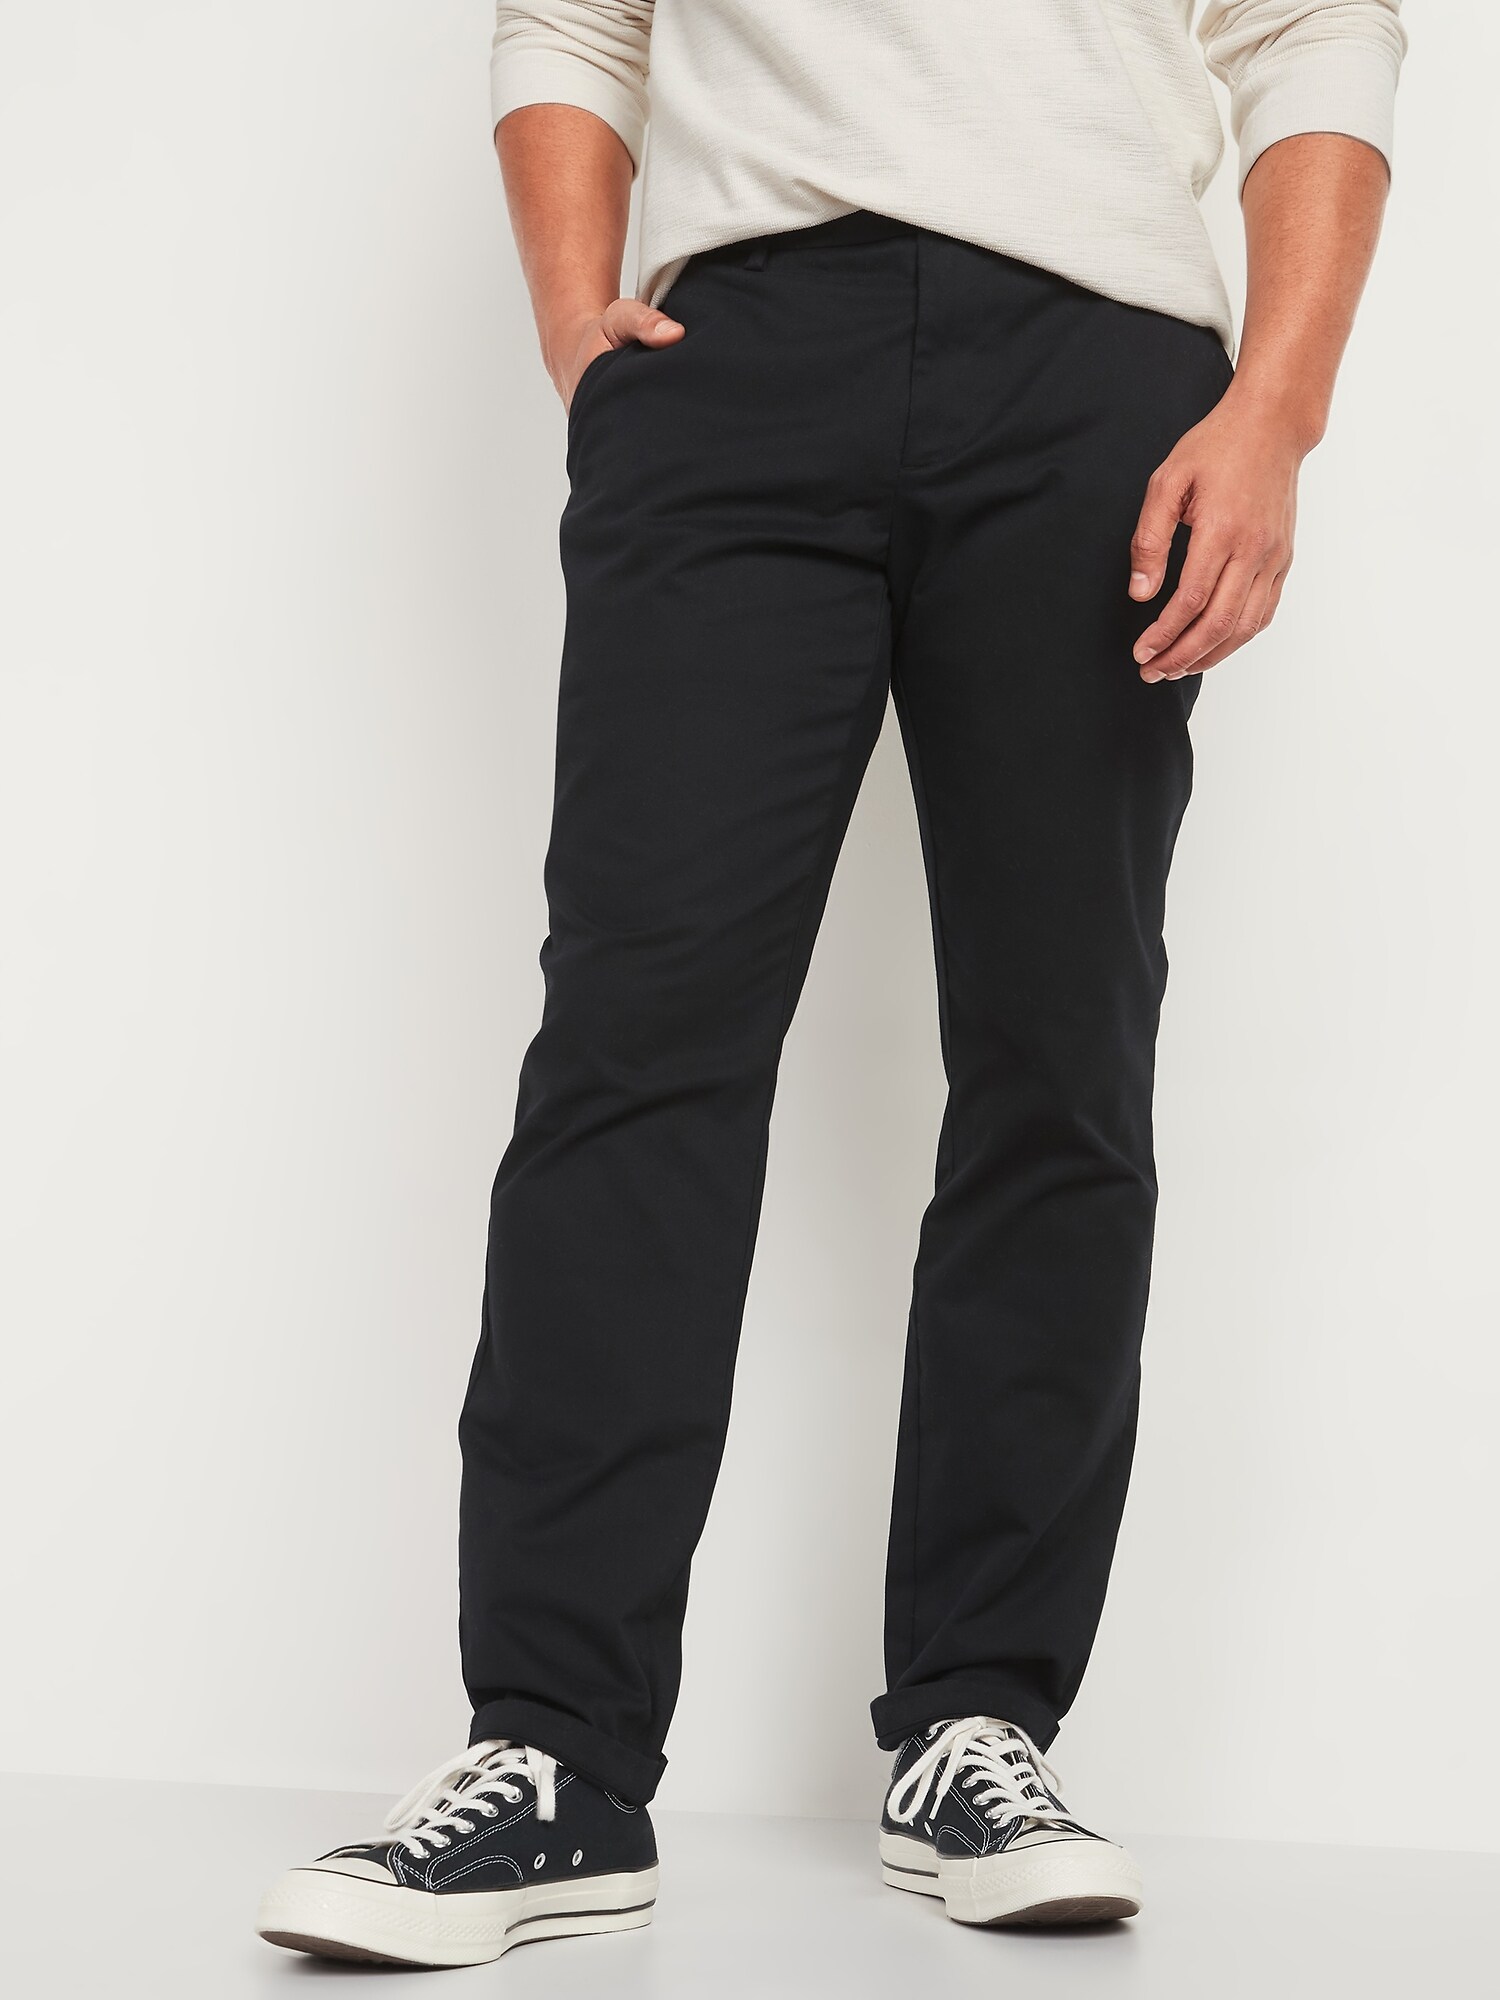 Old Navy Athletic Ultimate Built-In Flex Chino Pants black. 1